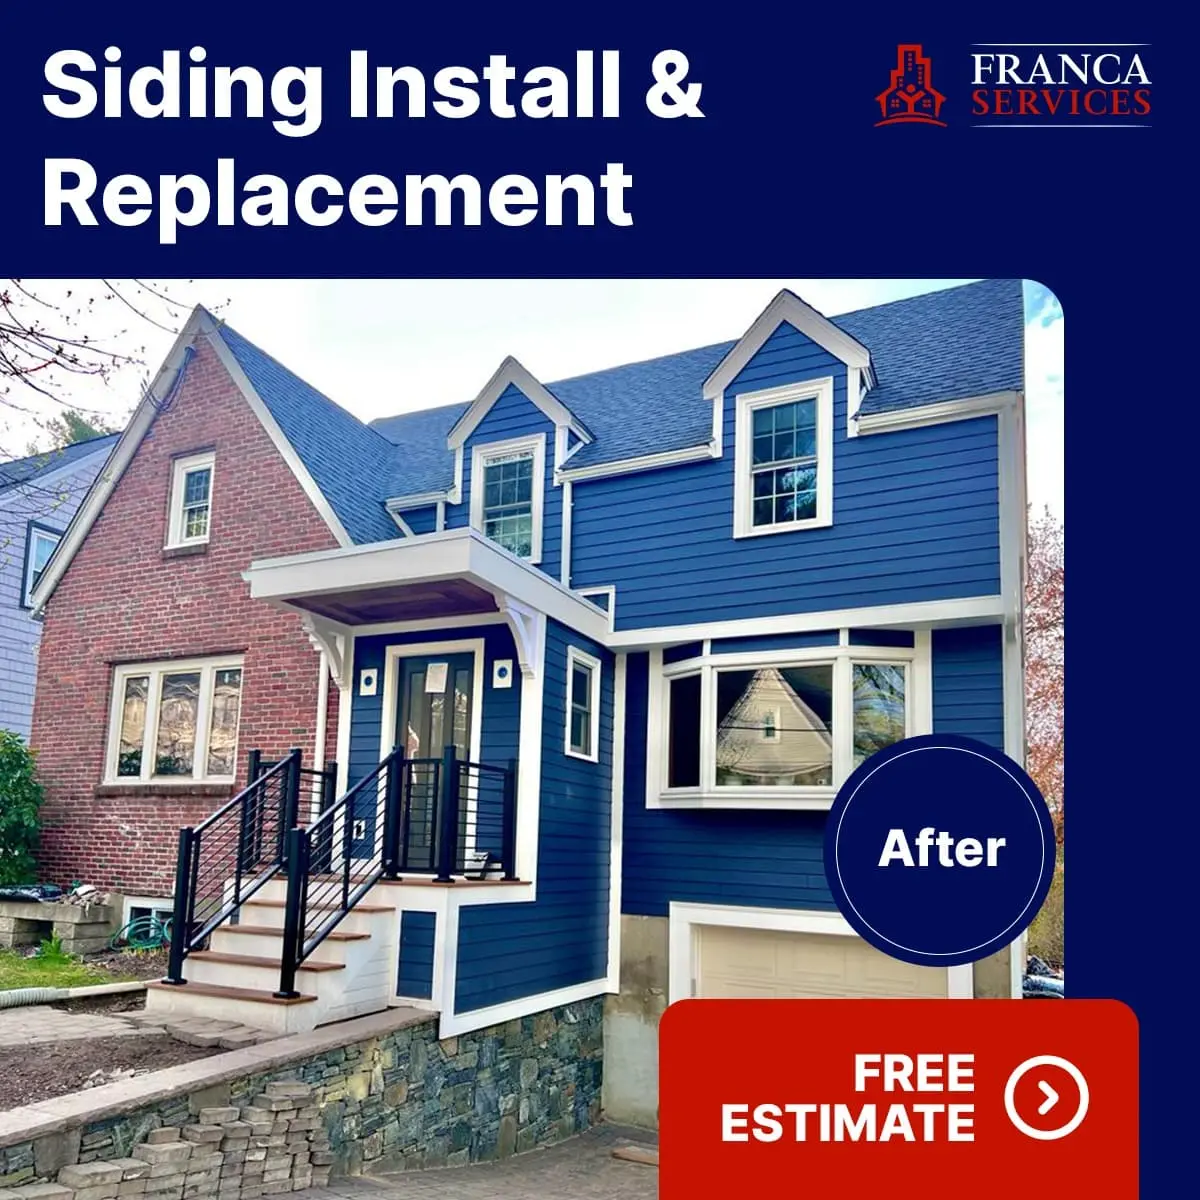 siding replacement service after in Waltham